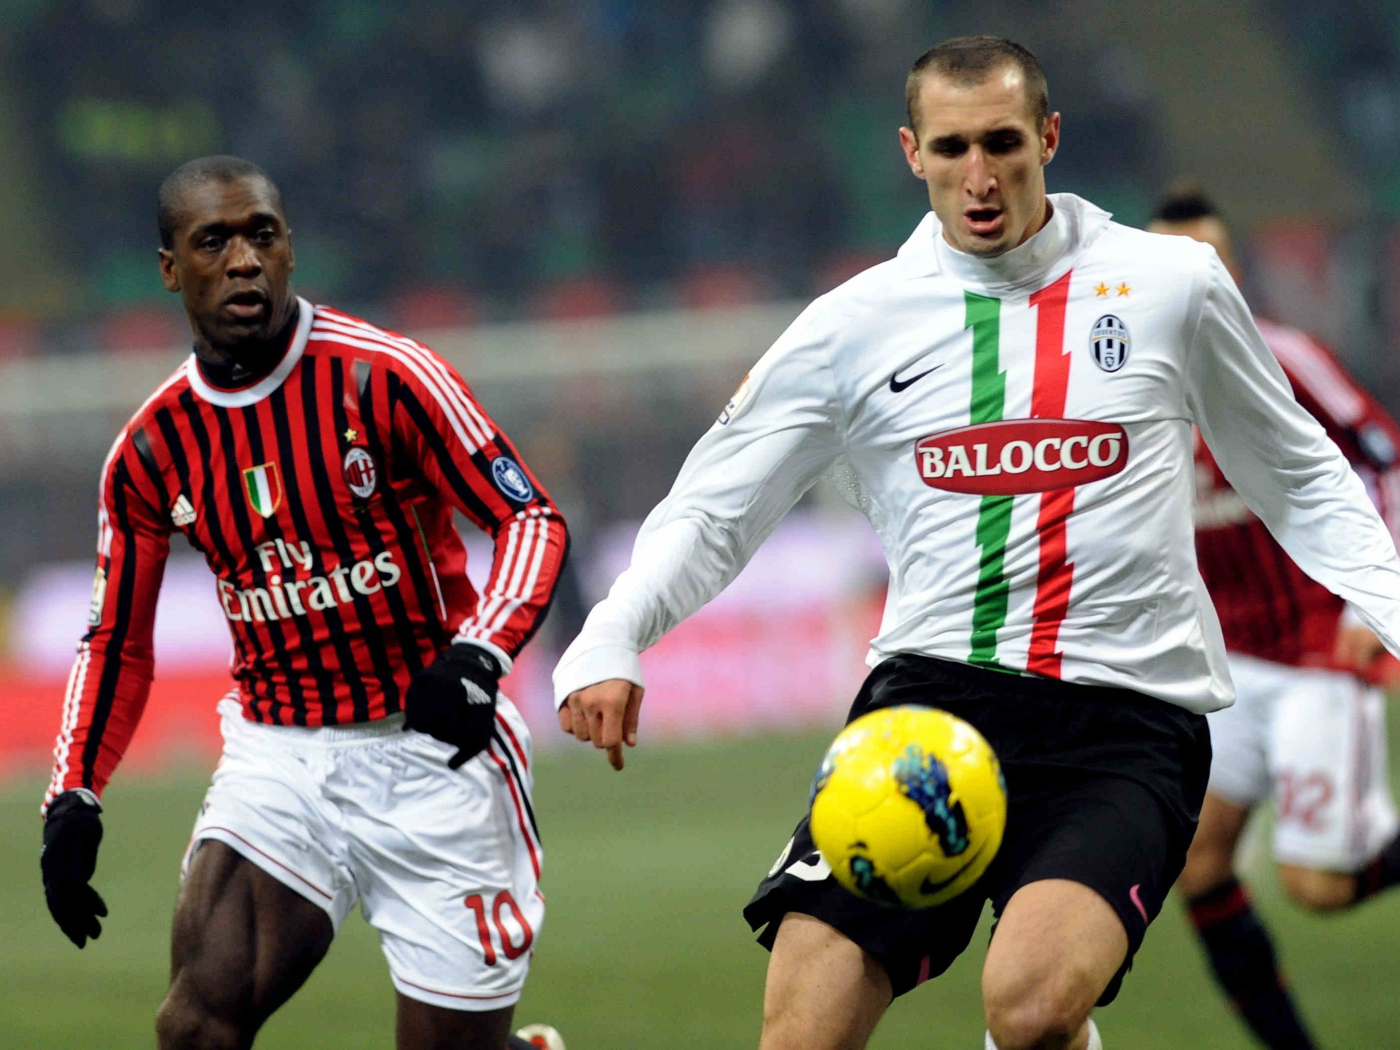 The best player of Juventus Giorgio Chiellini in a middle of the action